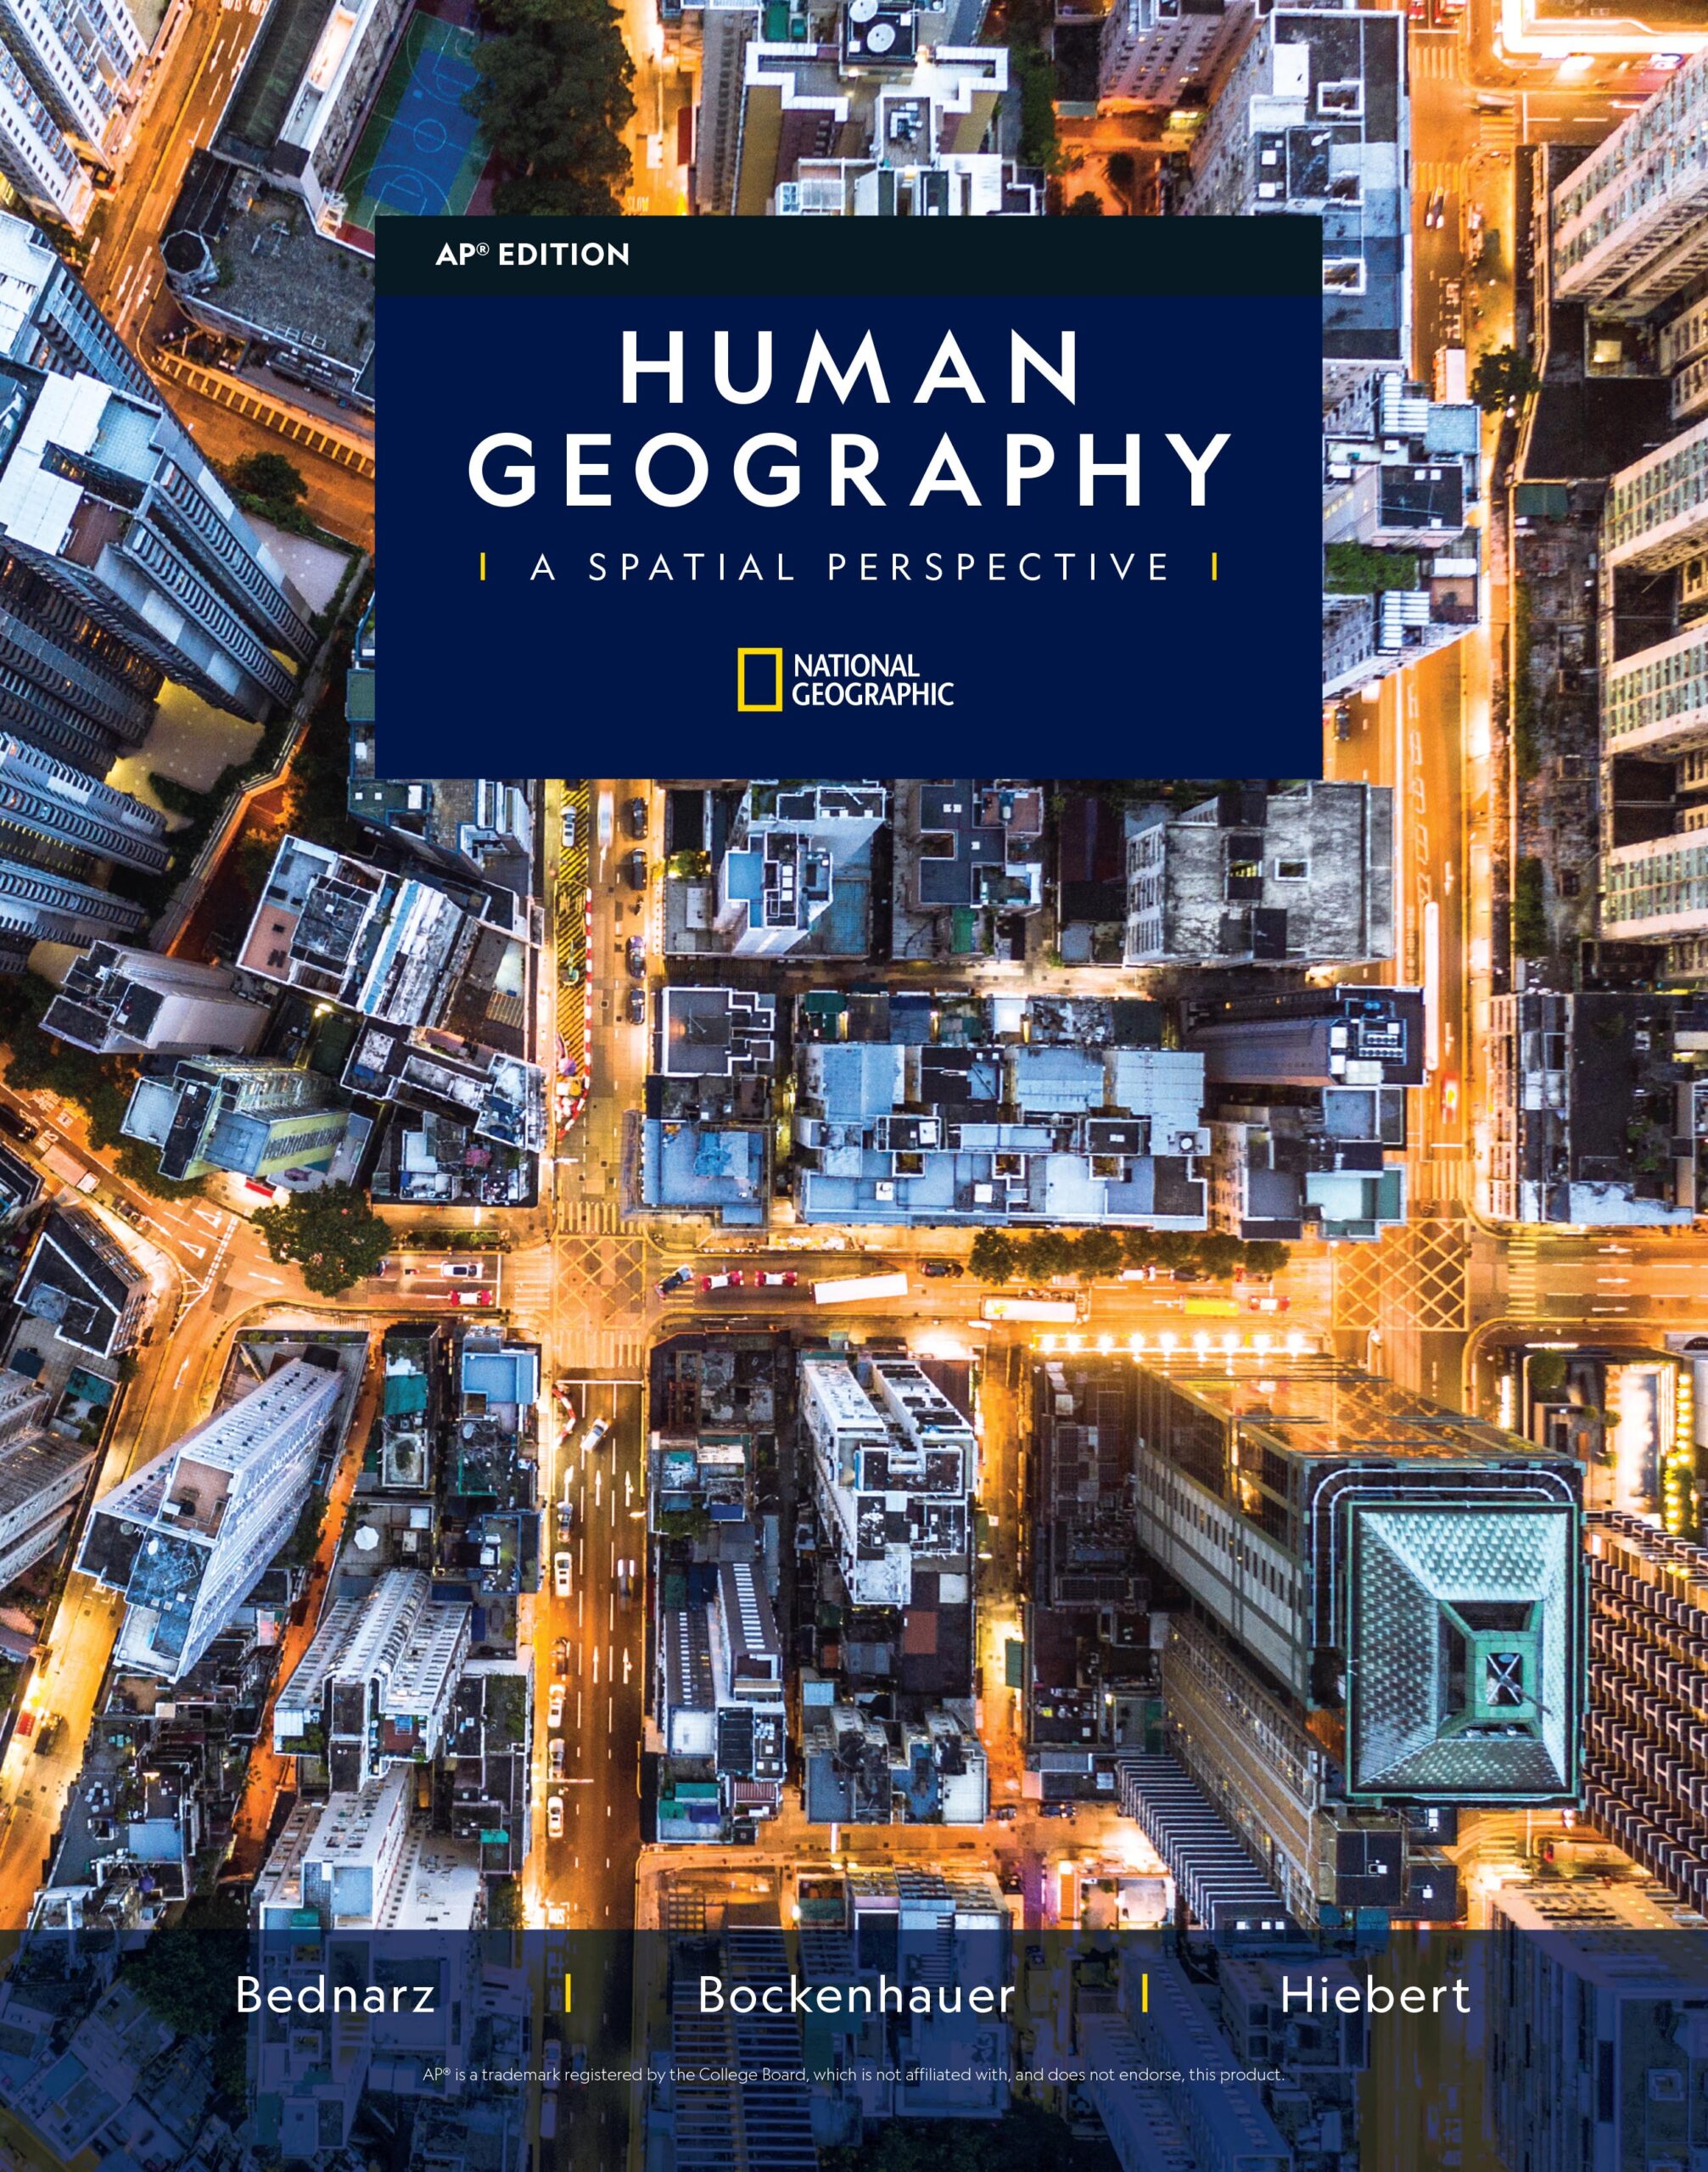 National Geographic Human Geography A Spatial Perspective AP® Edition cover